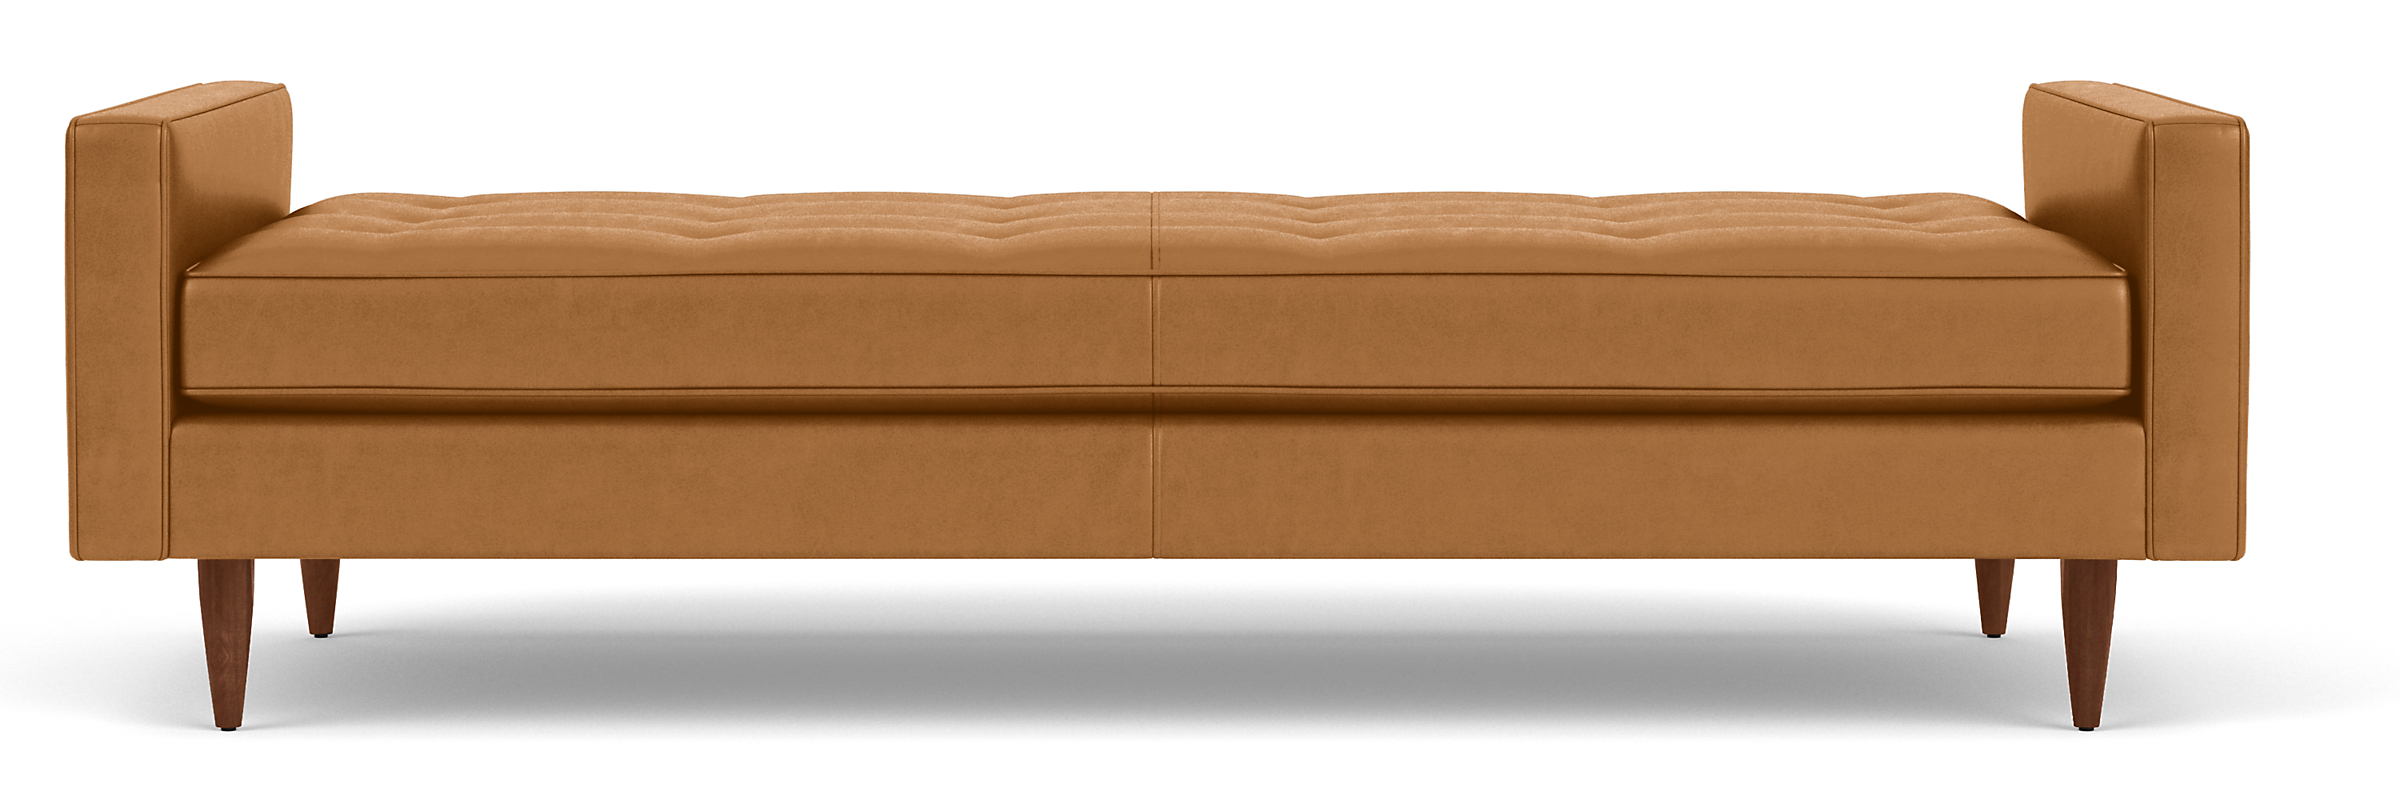 Reese Leather Daybed